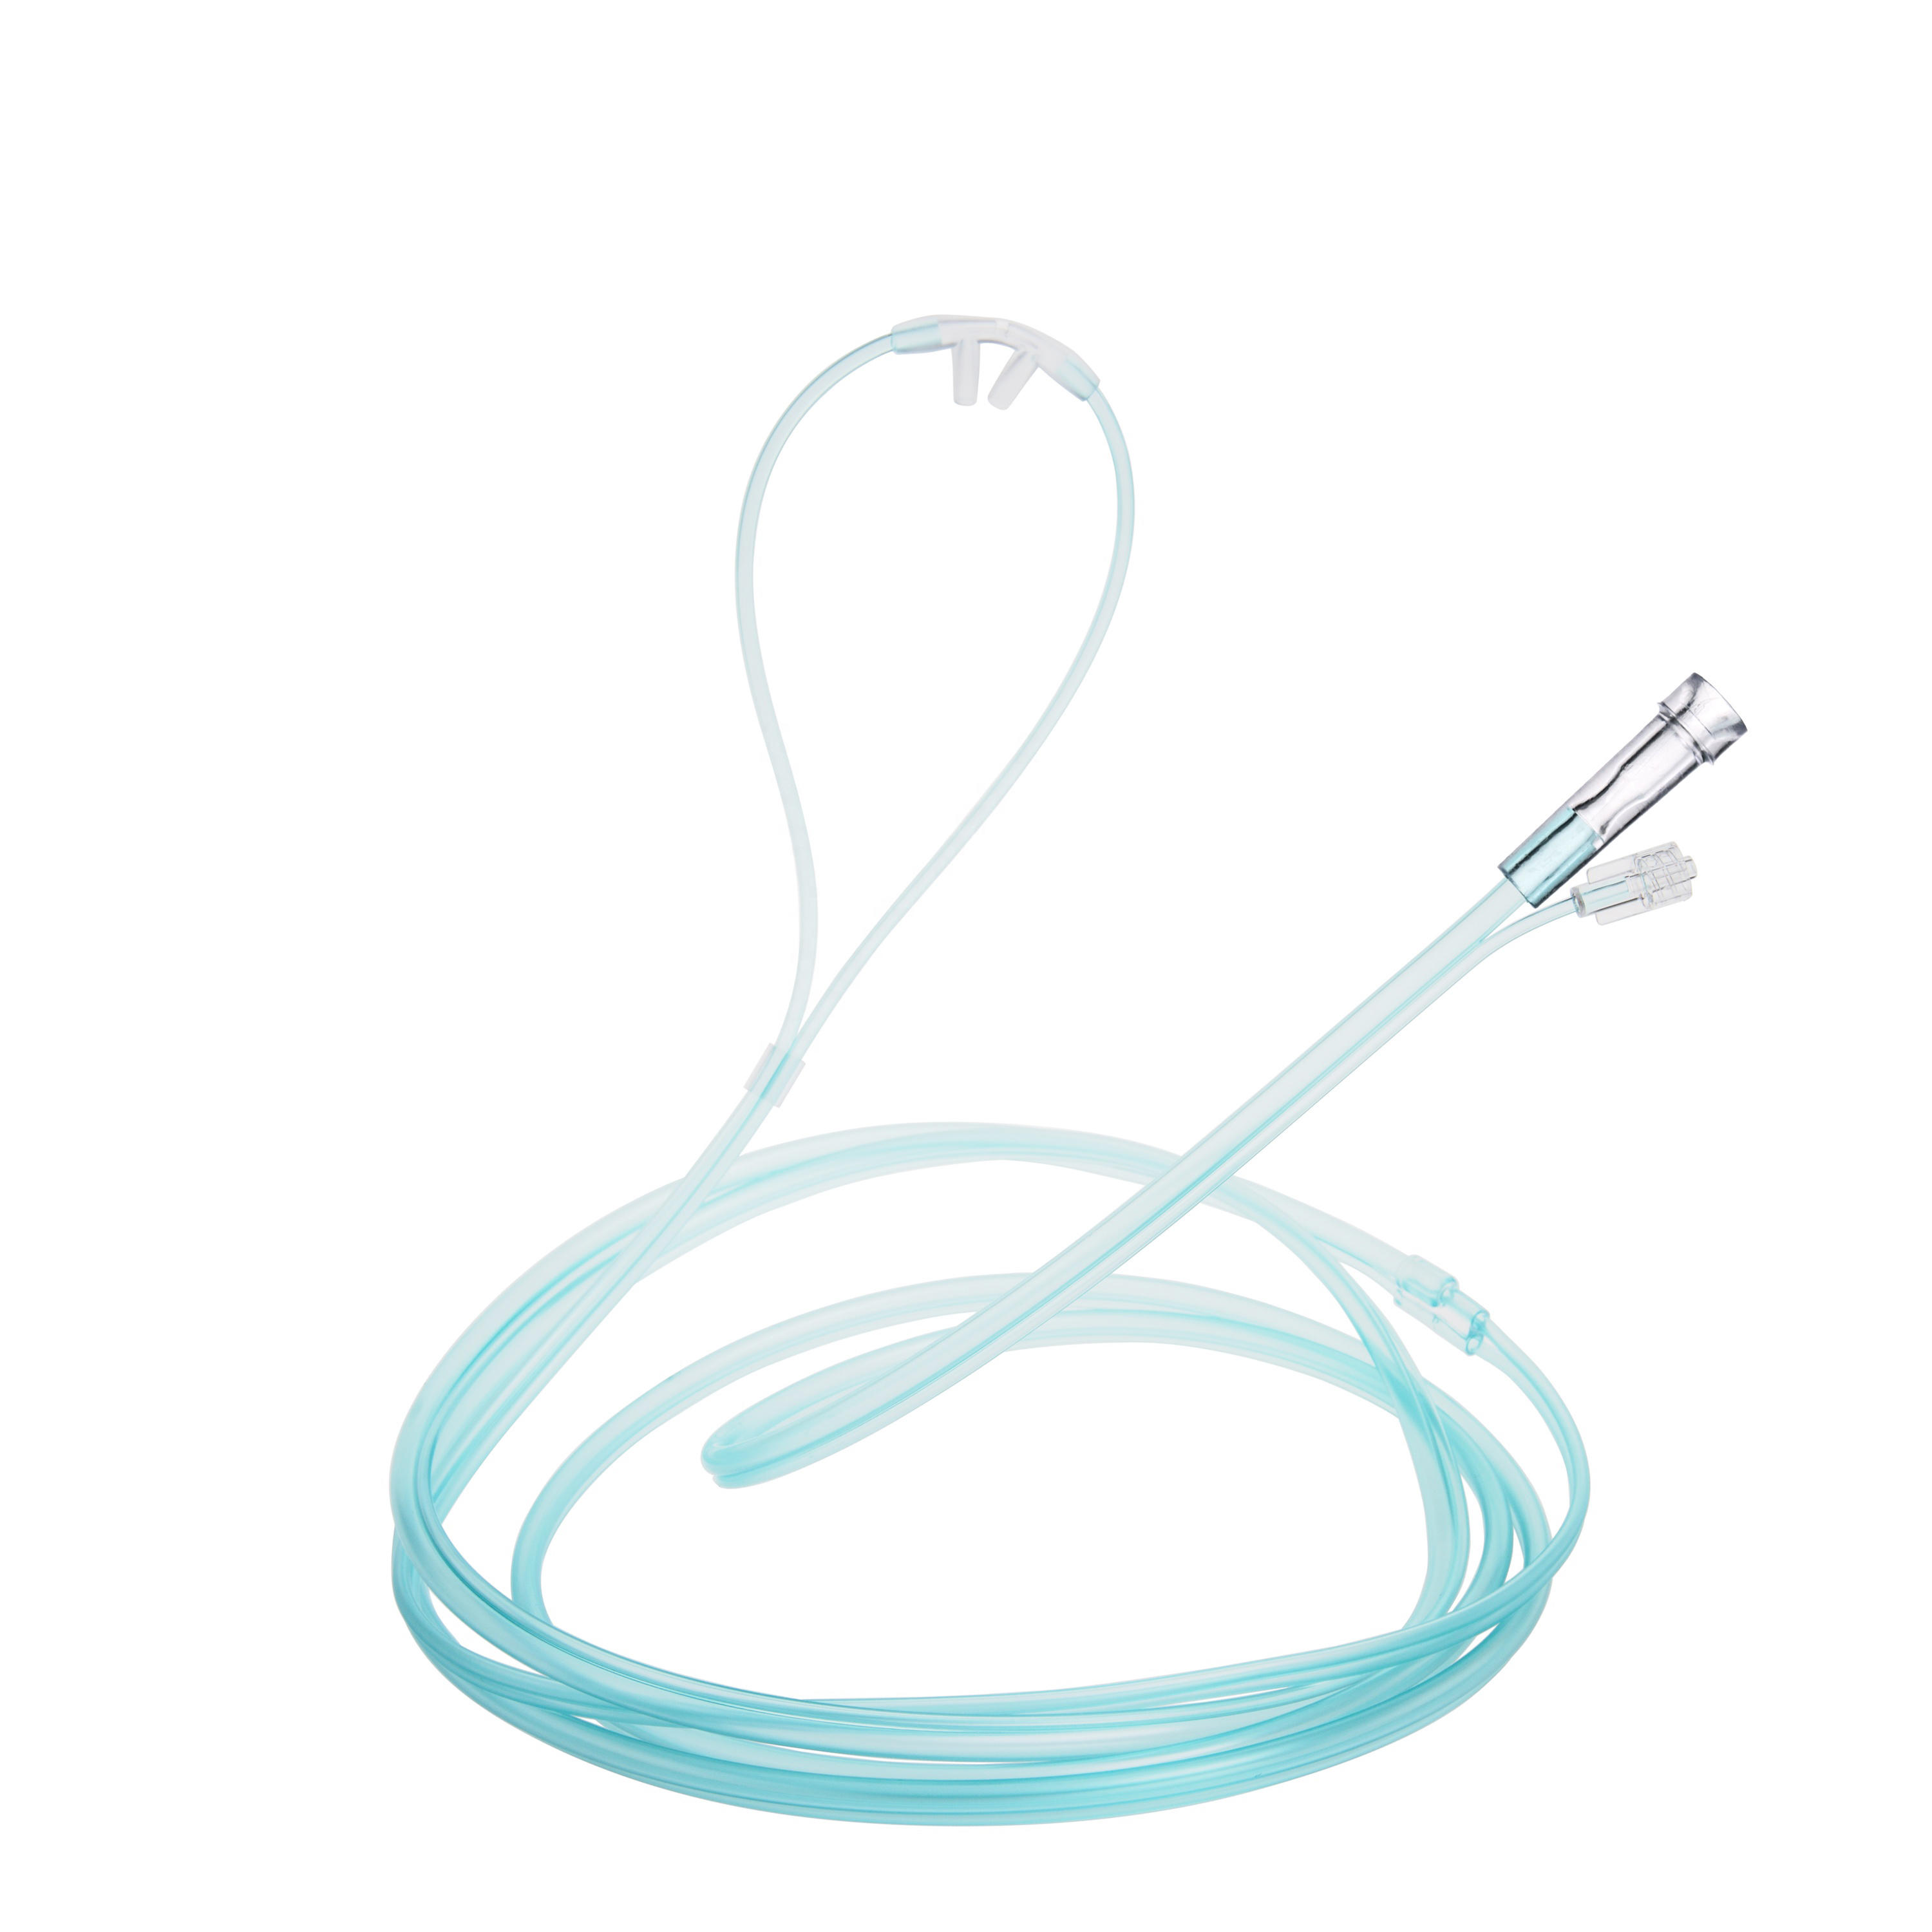 Disposable Nasal Cannula: The Key to Effective Oxygen Therapy and Infection Prevention